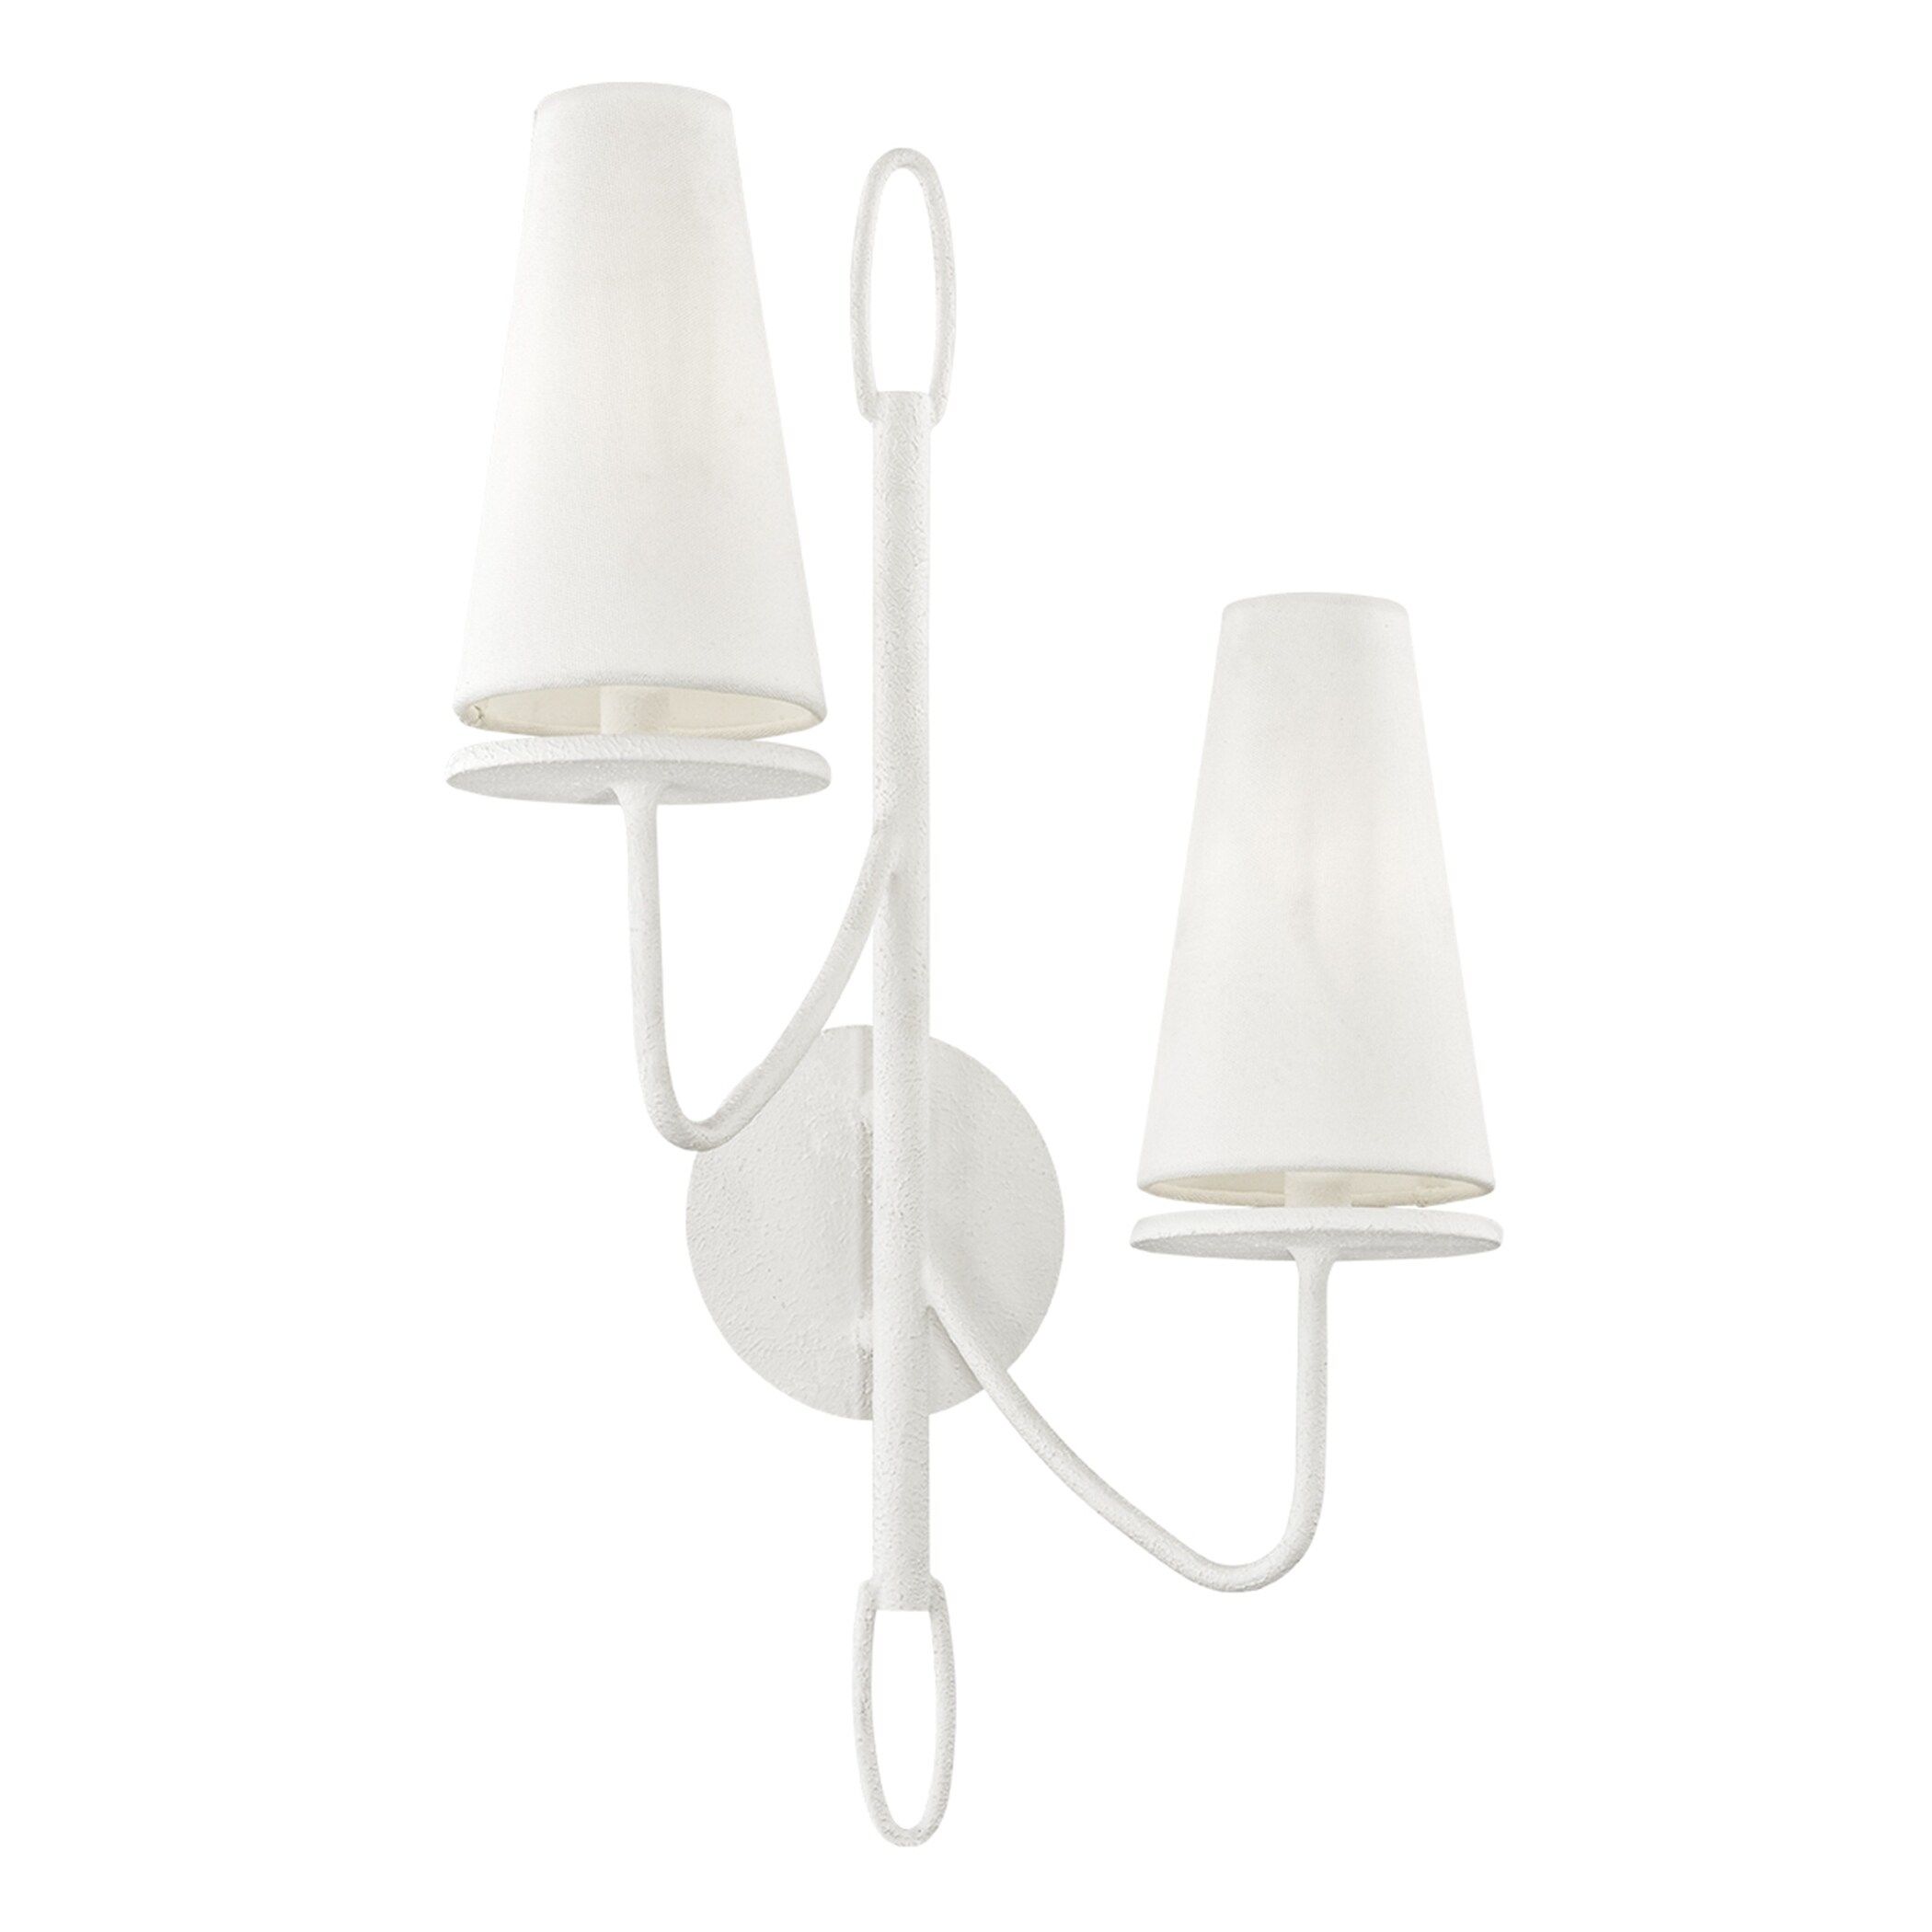 Troy Lighting Marcel 2-light Gesso White Wall Sconce | Bed Bath & Beyond